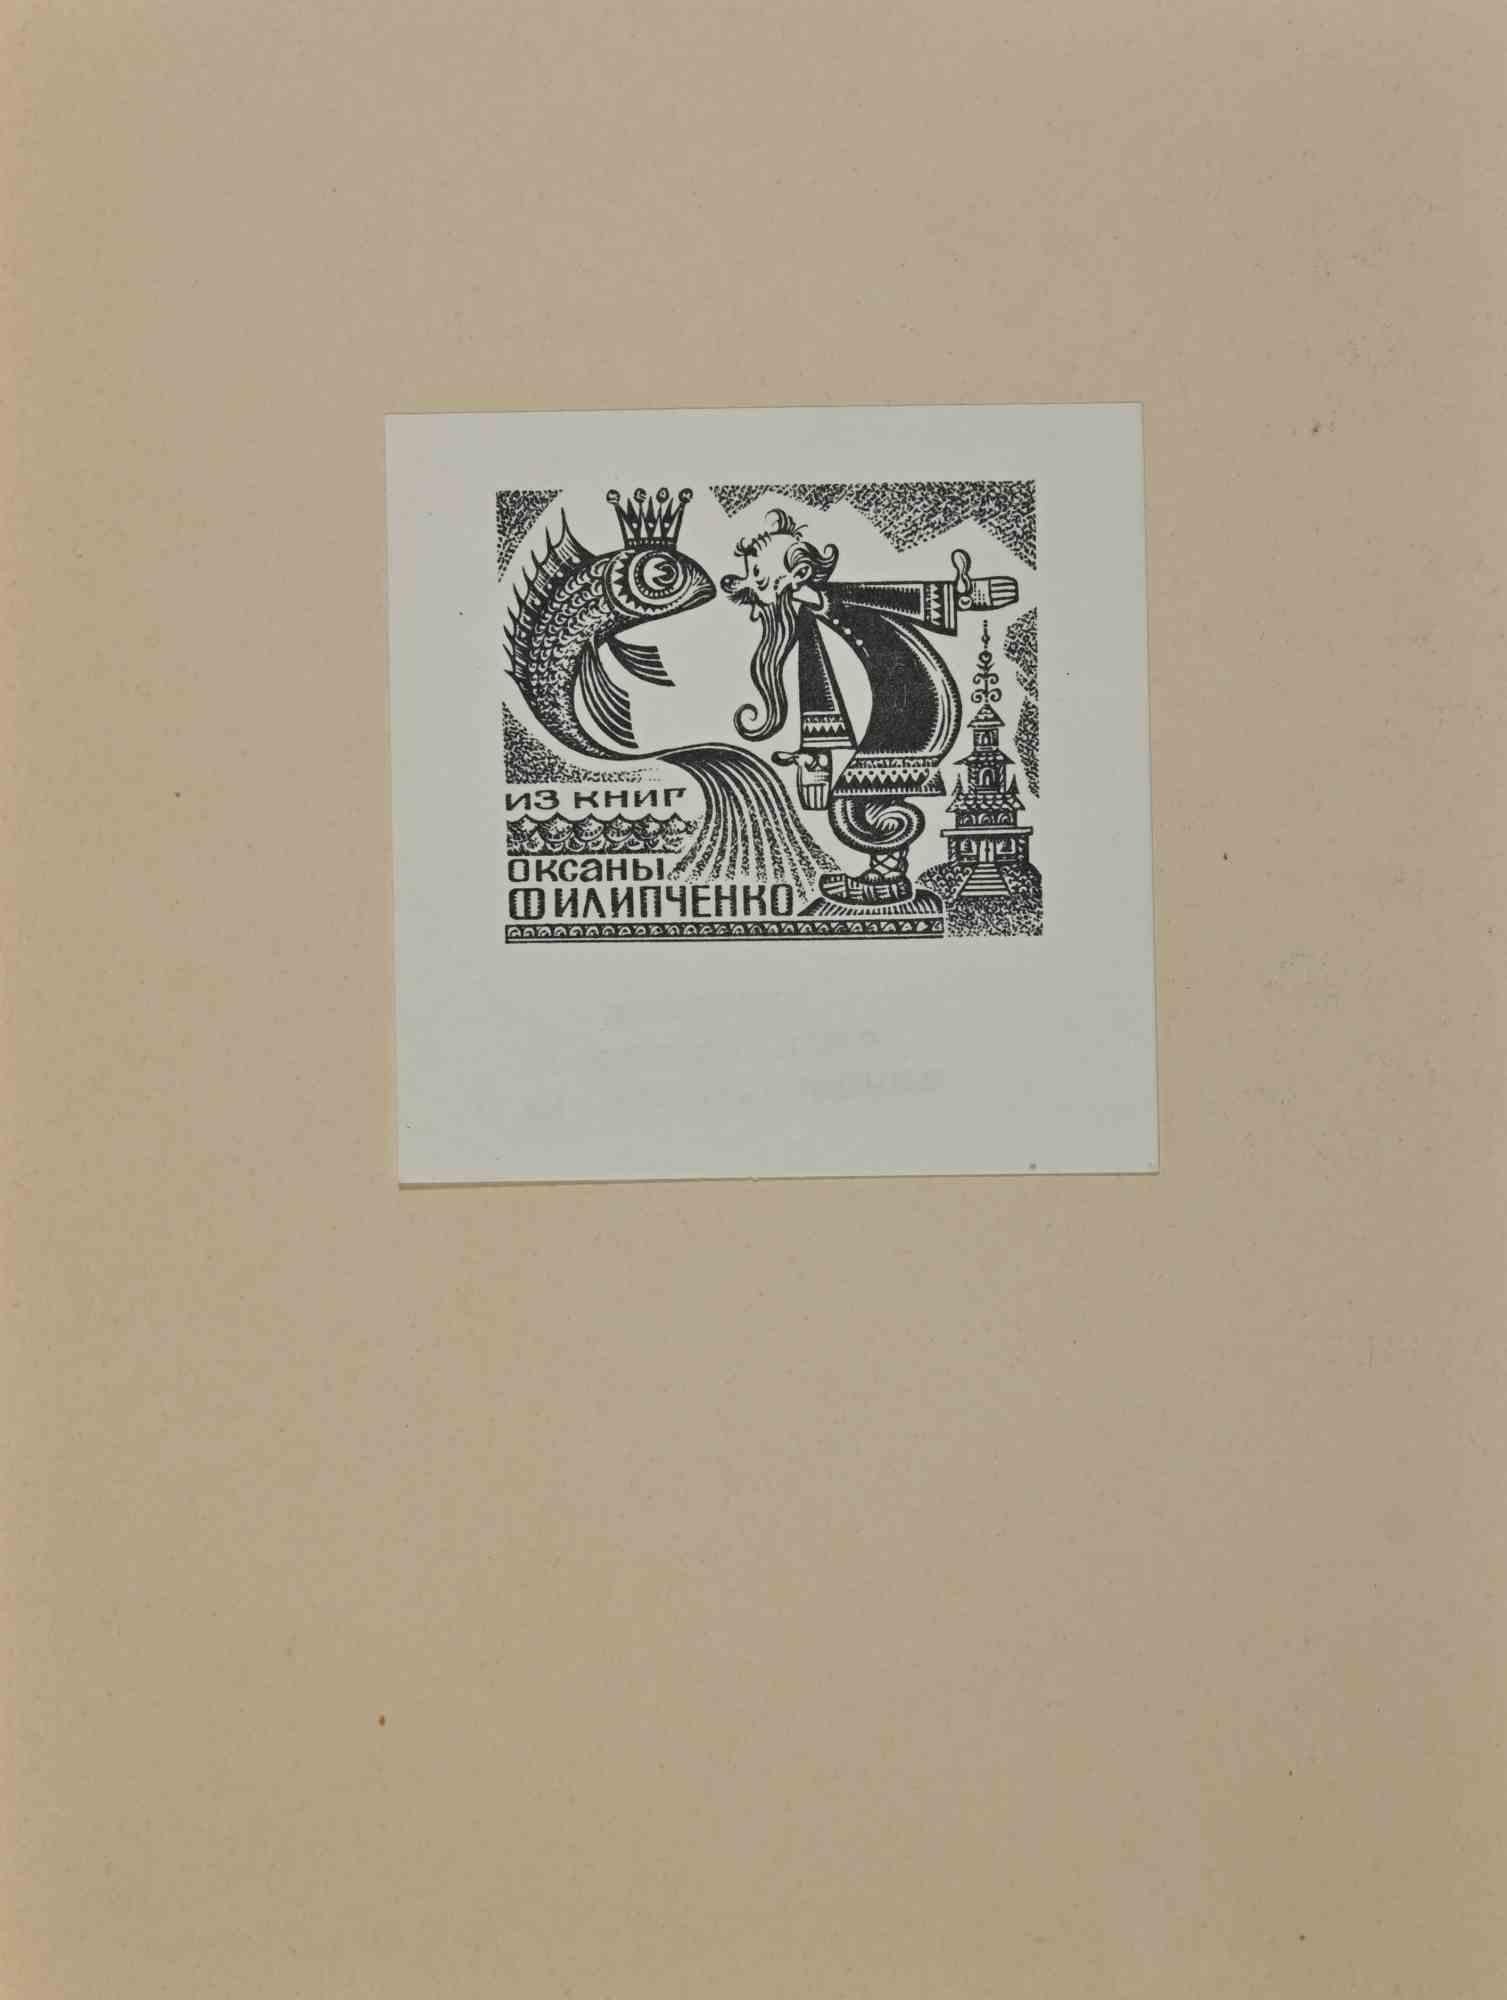  Ex Libris - Woodcut - Mid 20th Century - Art by Unknown